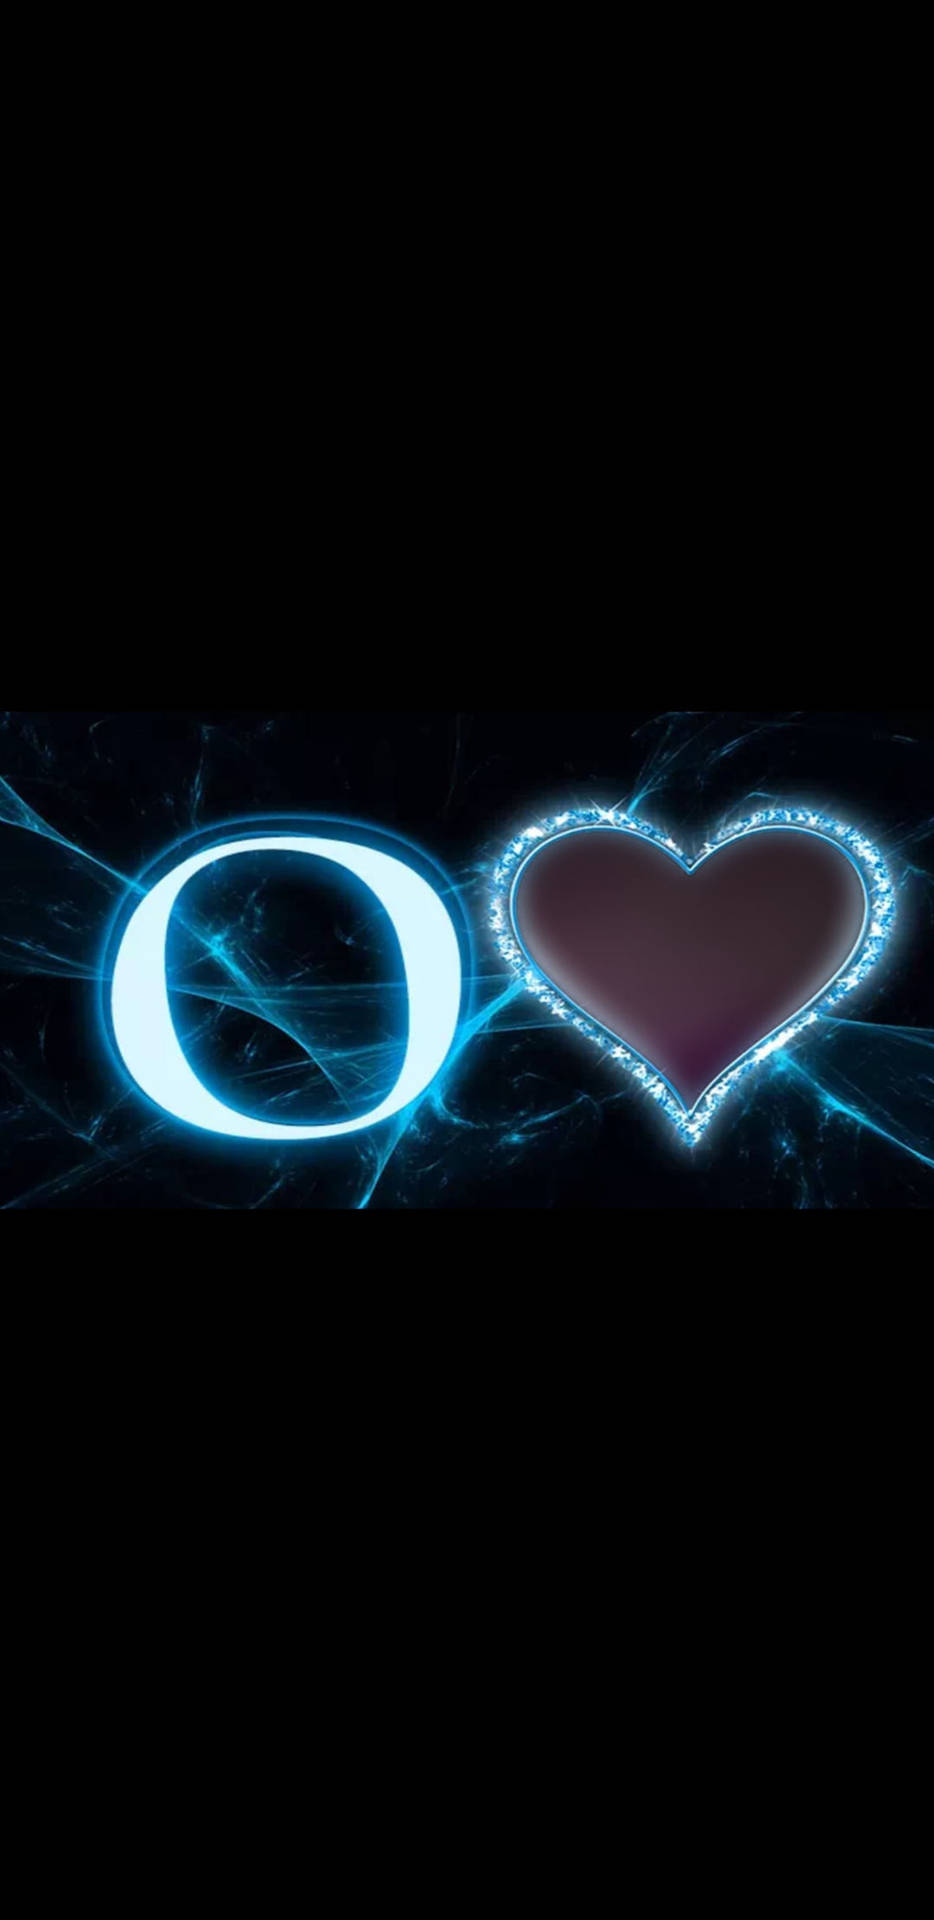 Letter O And Black Heart Background